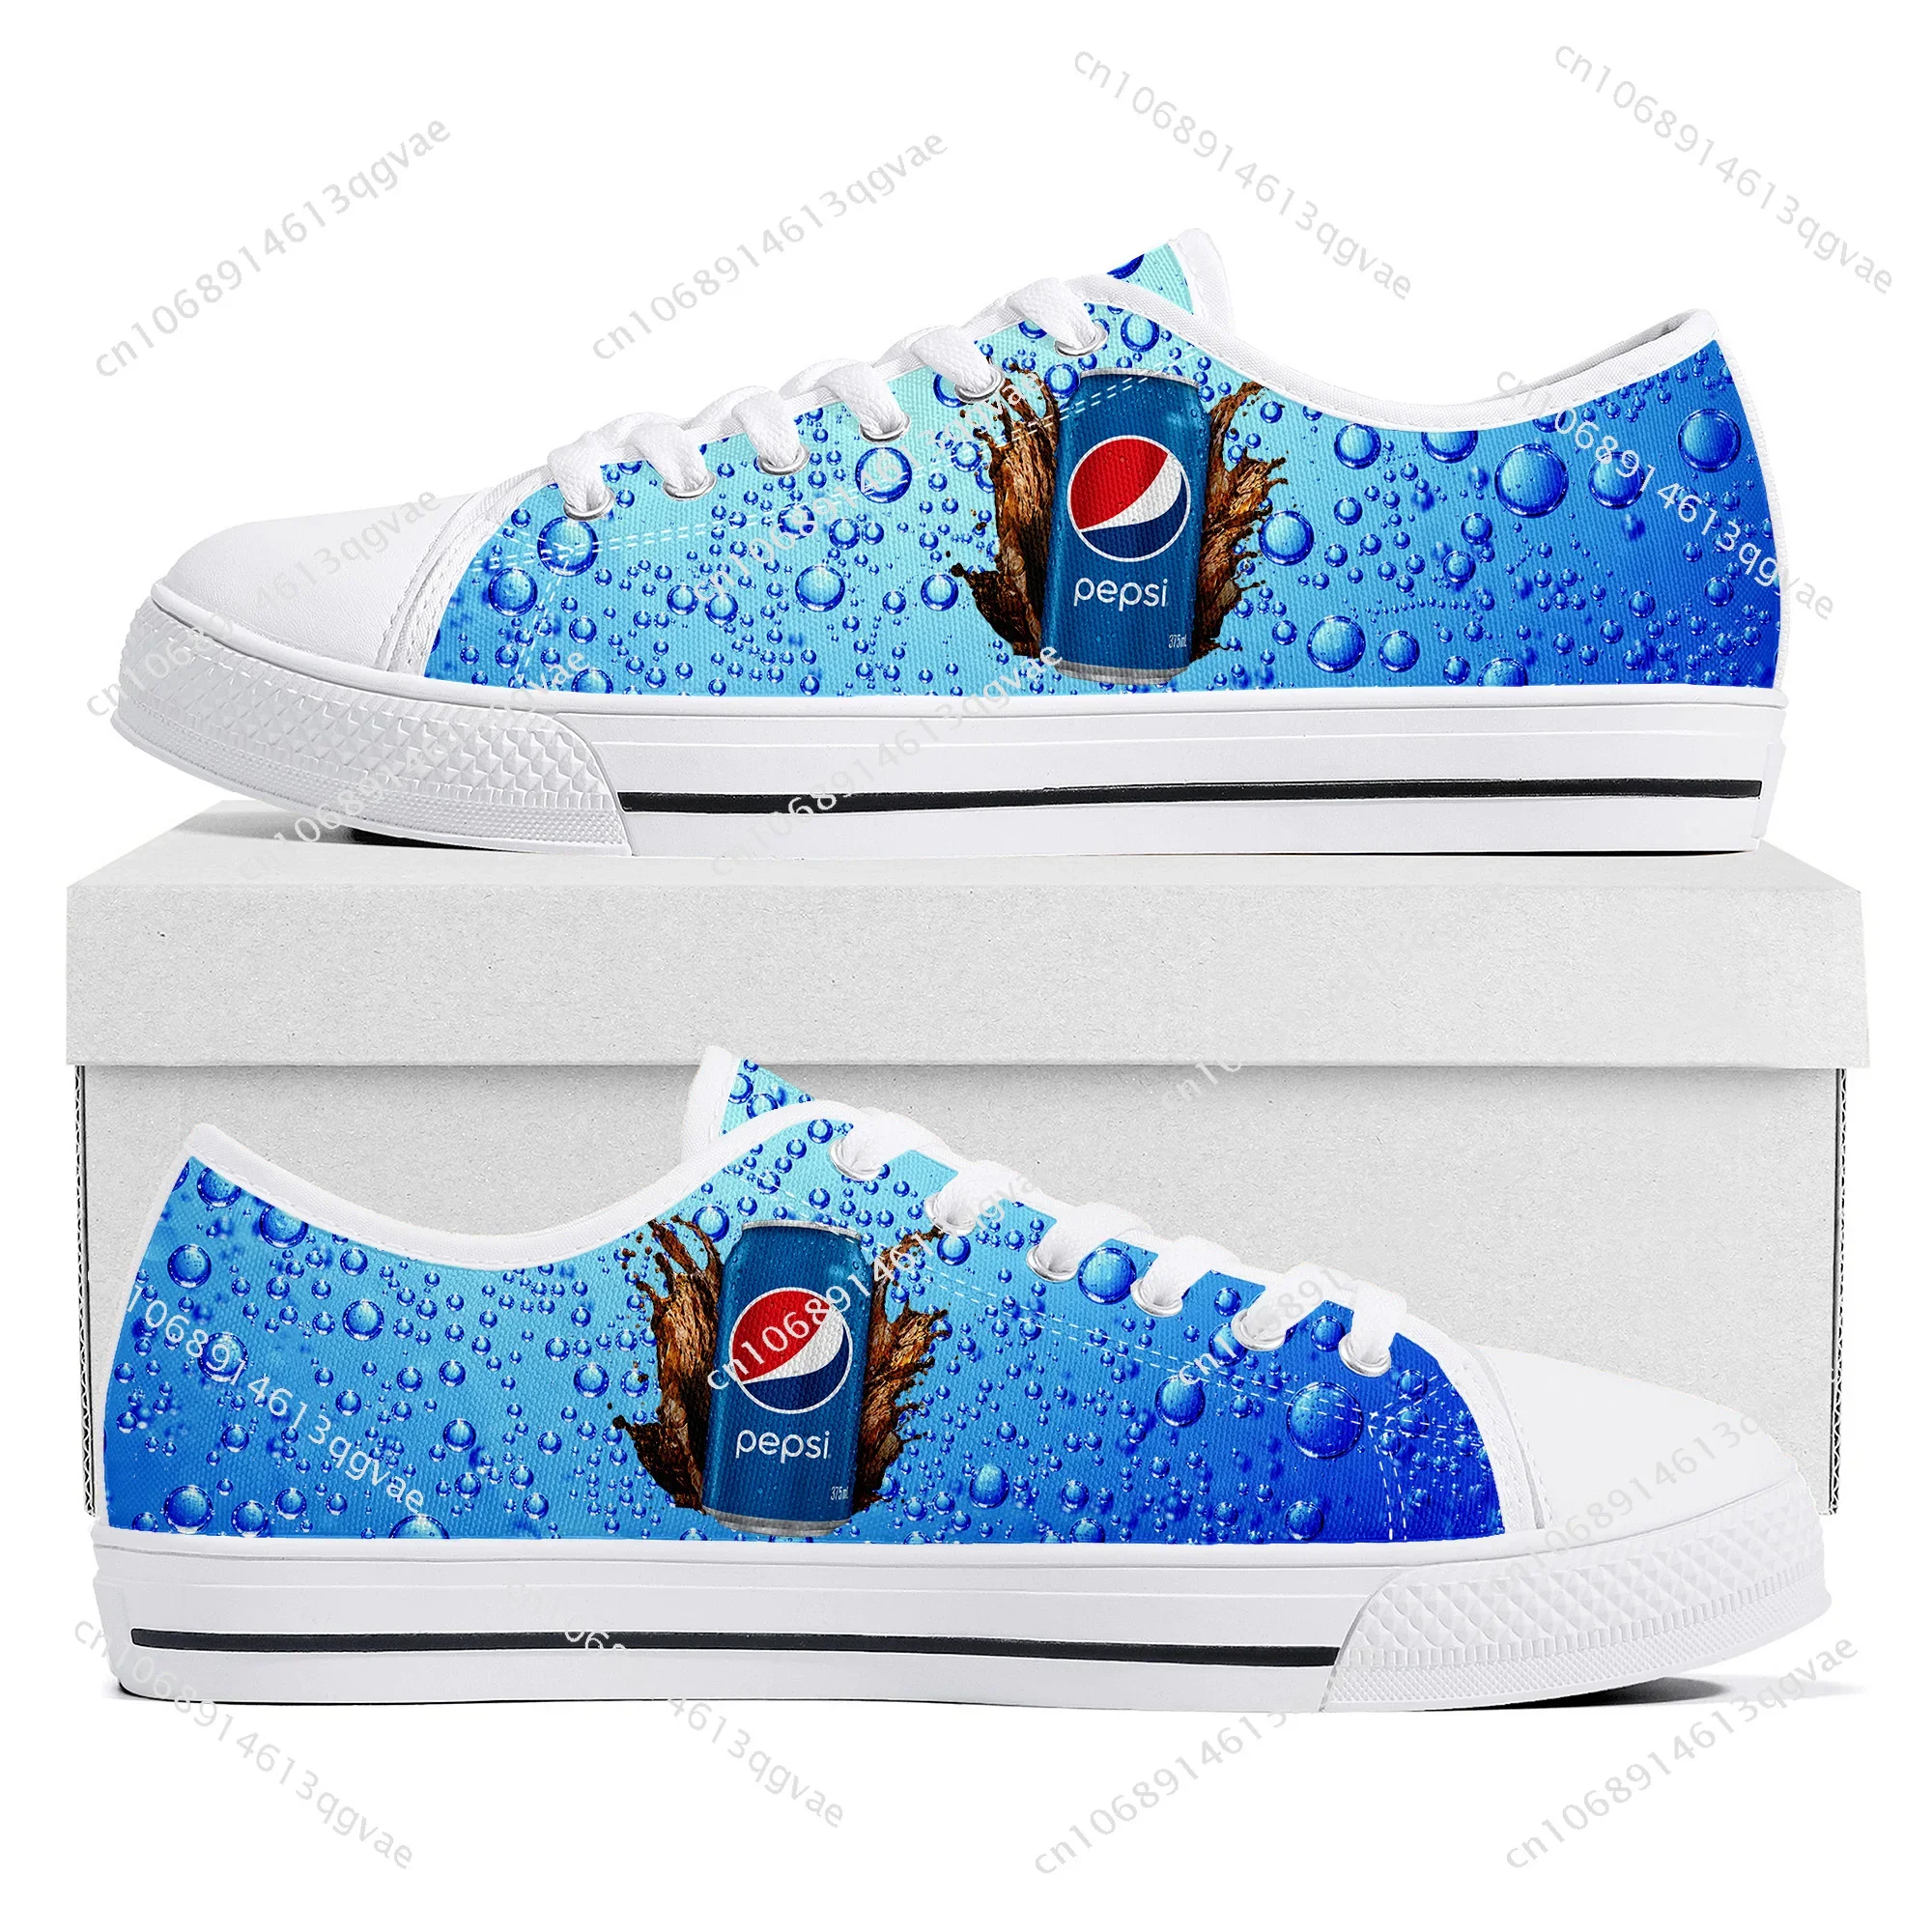 

P-Pepsi-Cola Low Top High Quality Sneakers Mens Womens Teenager Tailor-made Shoe Canvas Sneaker Casual Couple Shoes White